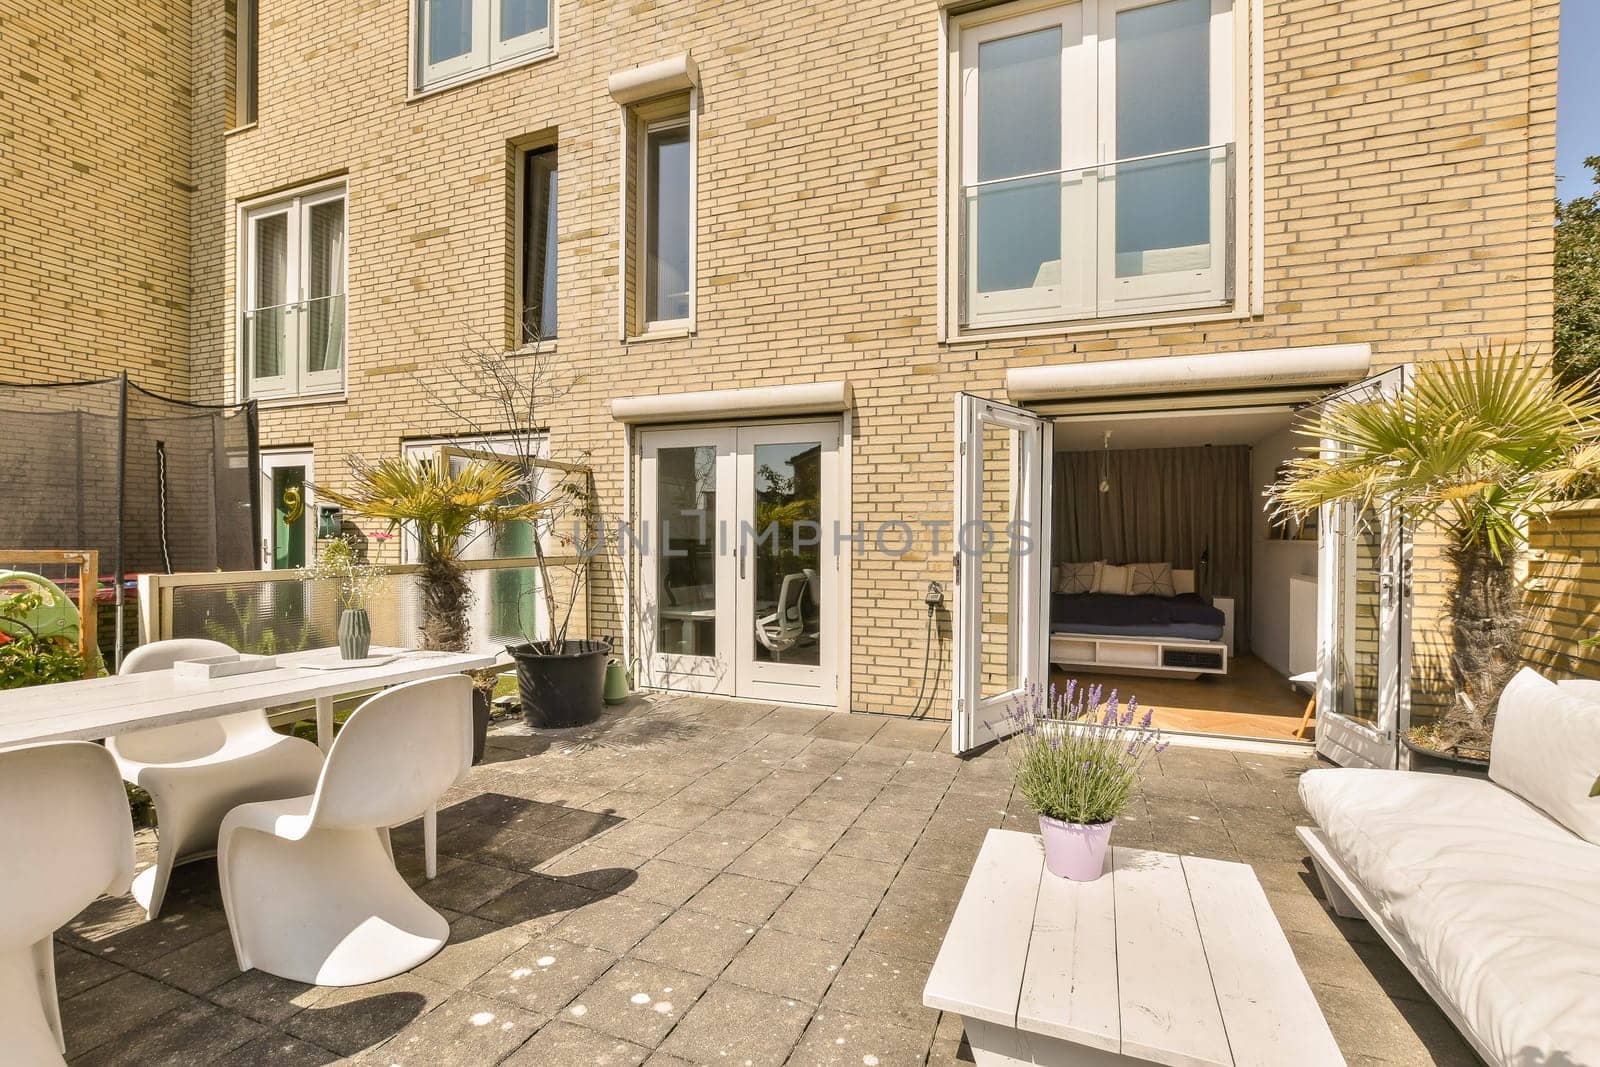 a patio with white furniture and plants on the ground in front of a brick building that is being used as an apartment